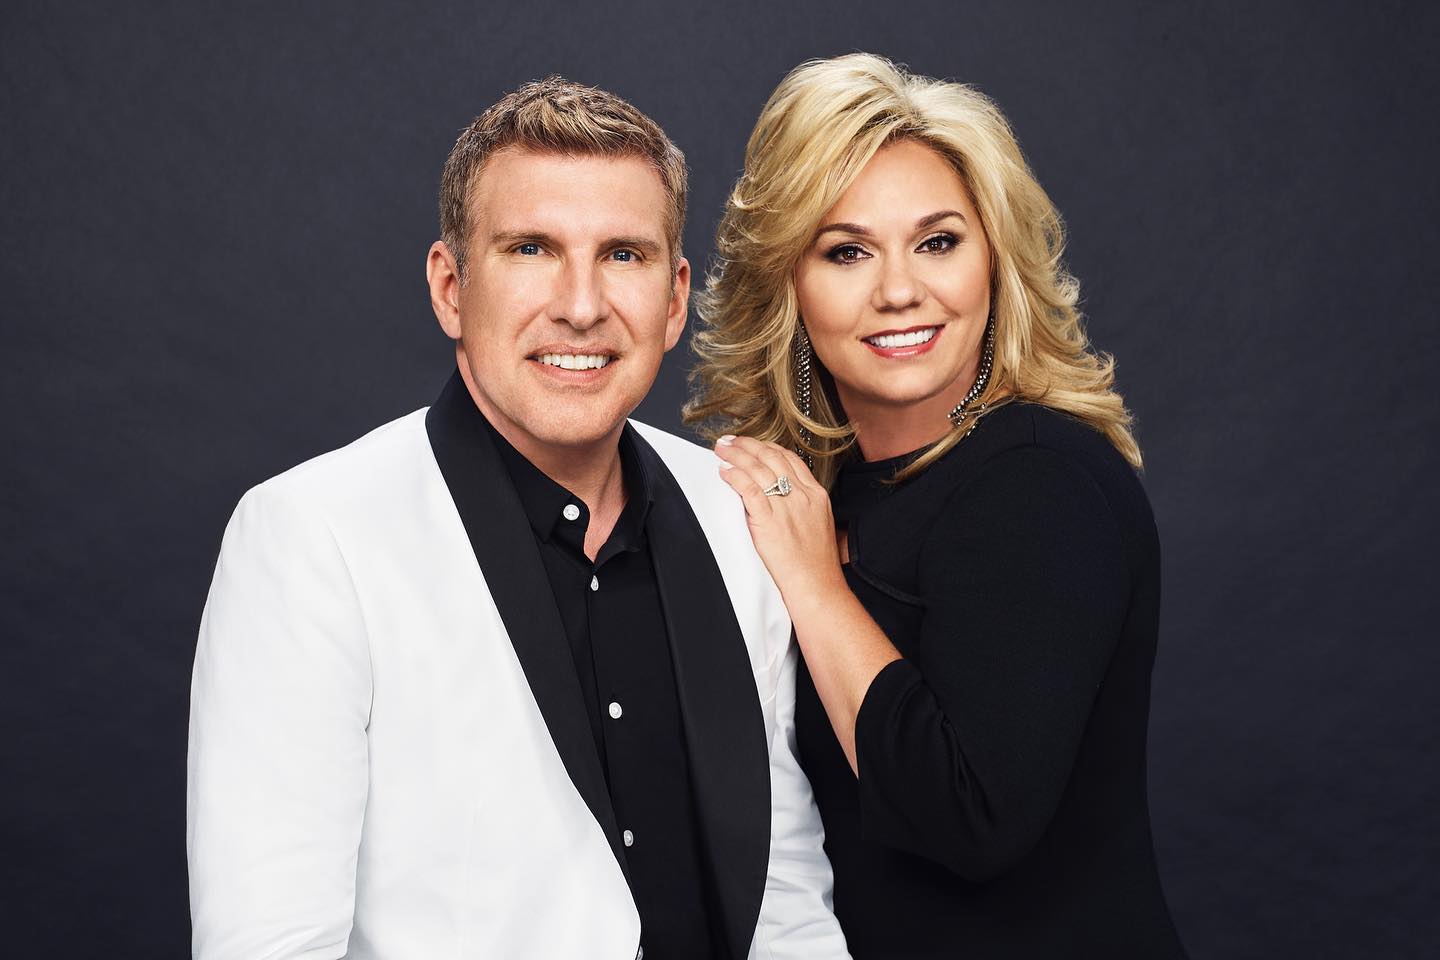 Reality TV stars Todd and Julie Chrisley sentenced to federal prison in tax evasion case